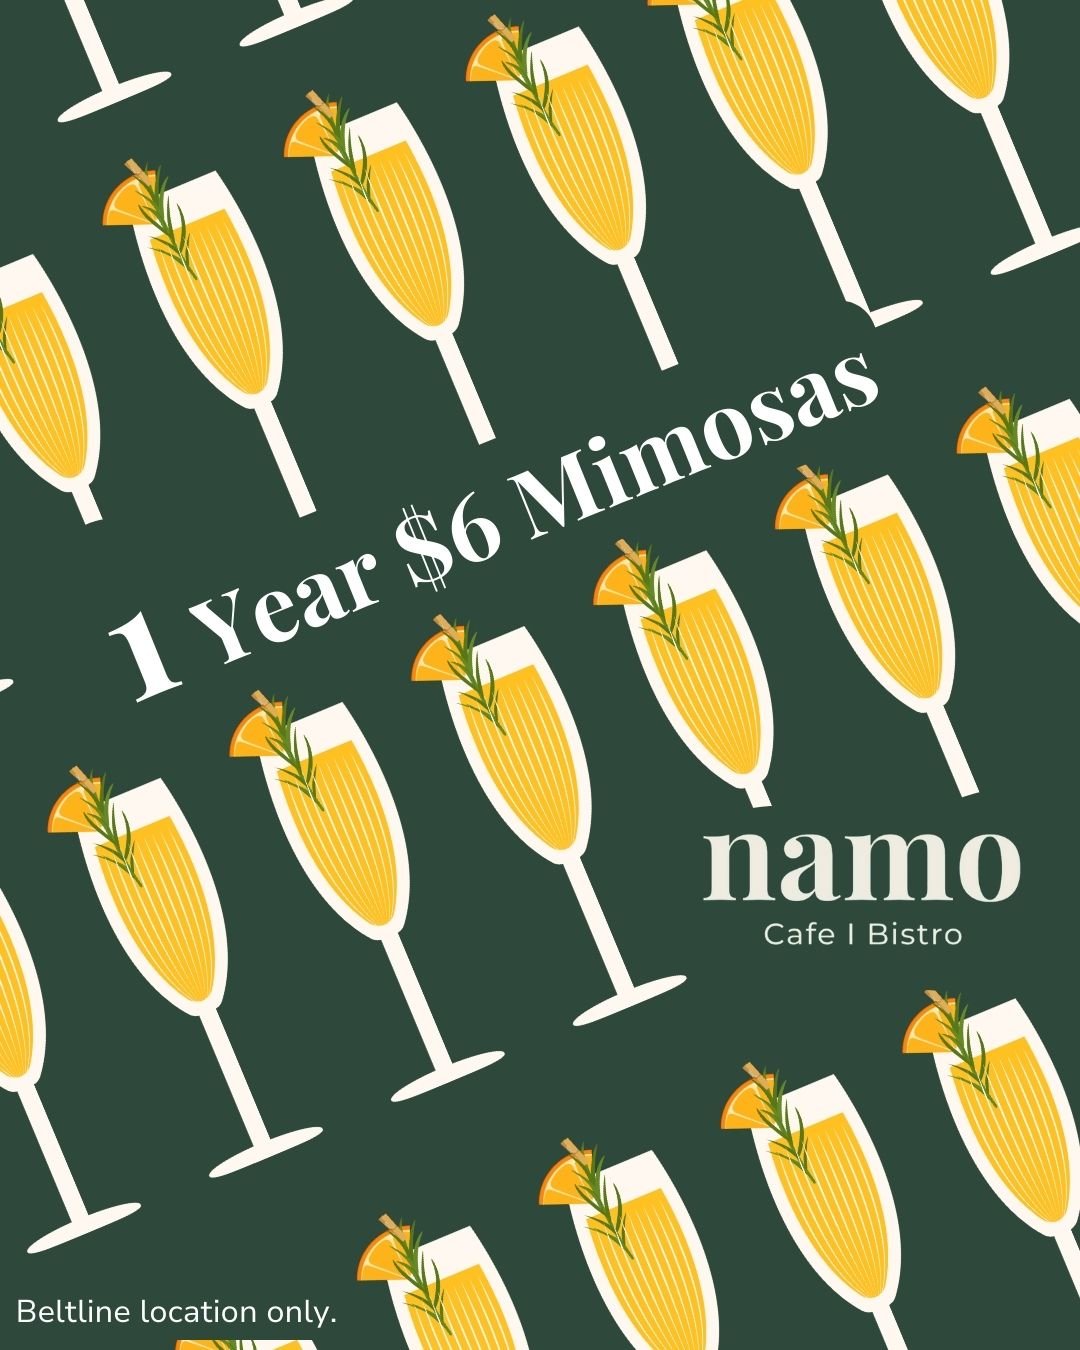 Join us in celebrating our 1 year anniversary at our Beltline location! 🎉 This weekend, May 4th &amp; 5th, enjoy $6 mimosas &ndash; available for this weekend only! Thank you, Calgary, for your amazing support! 🥂 

Chef-driven family owned and oper